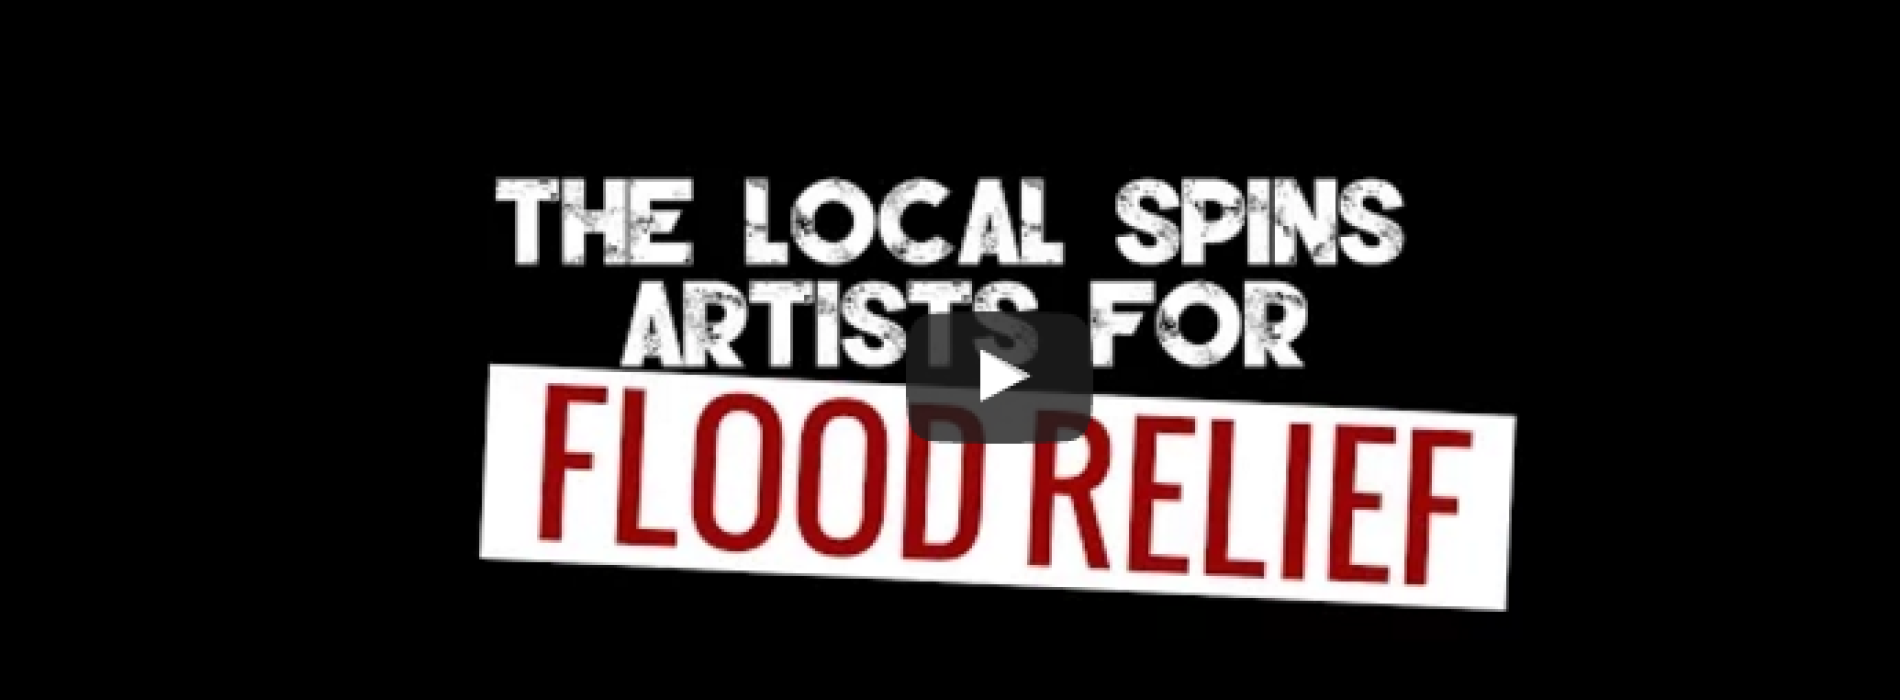 The Local Spins Artists For Flood Relief – We’re On Our Way